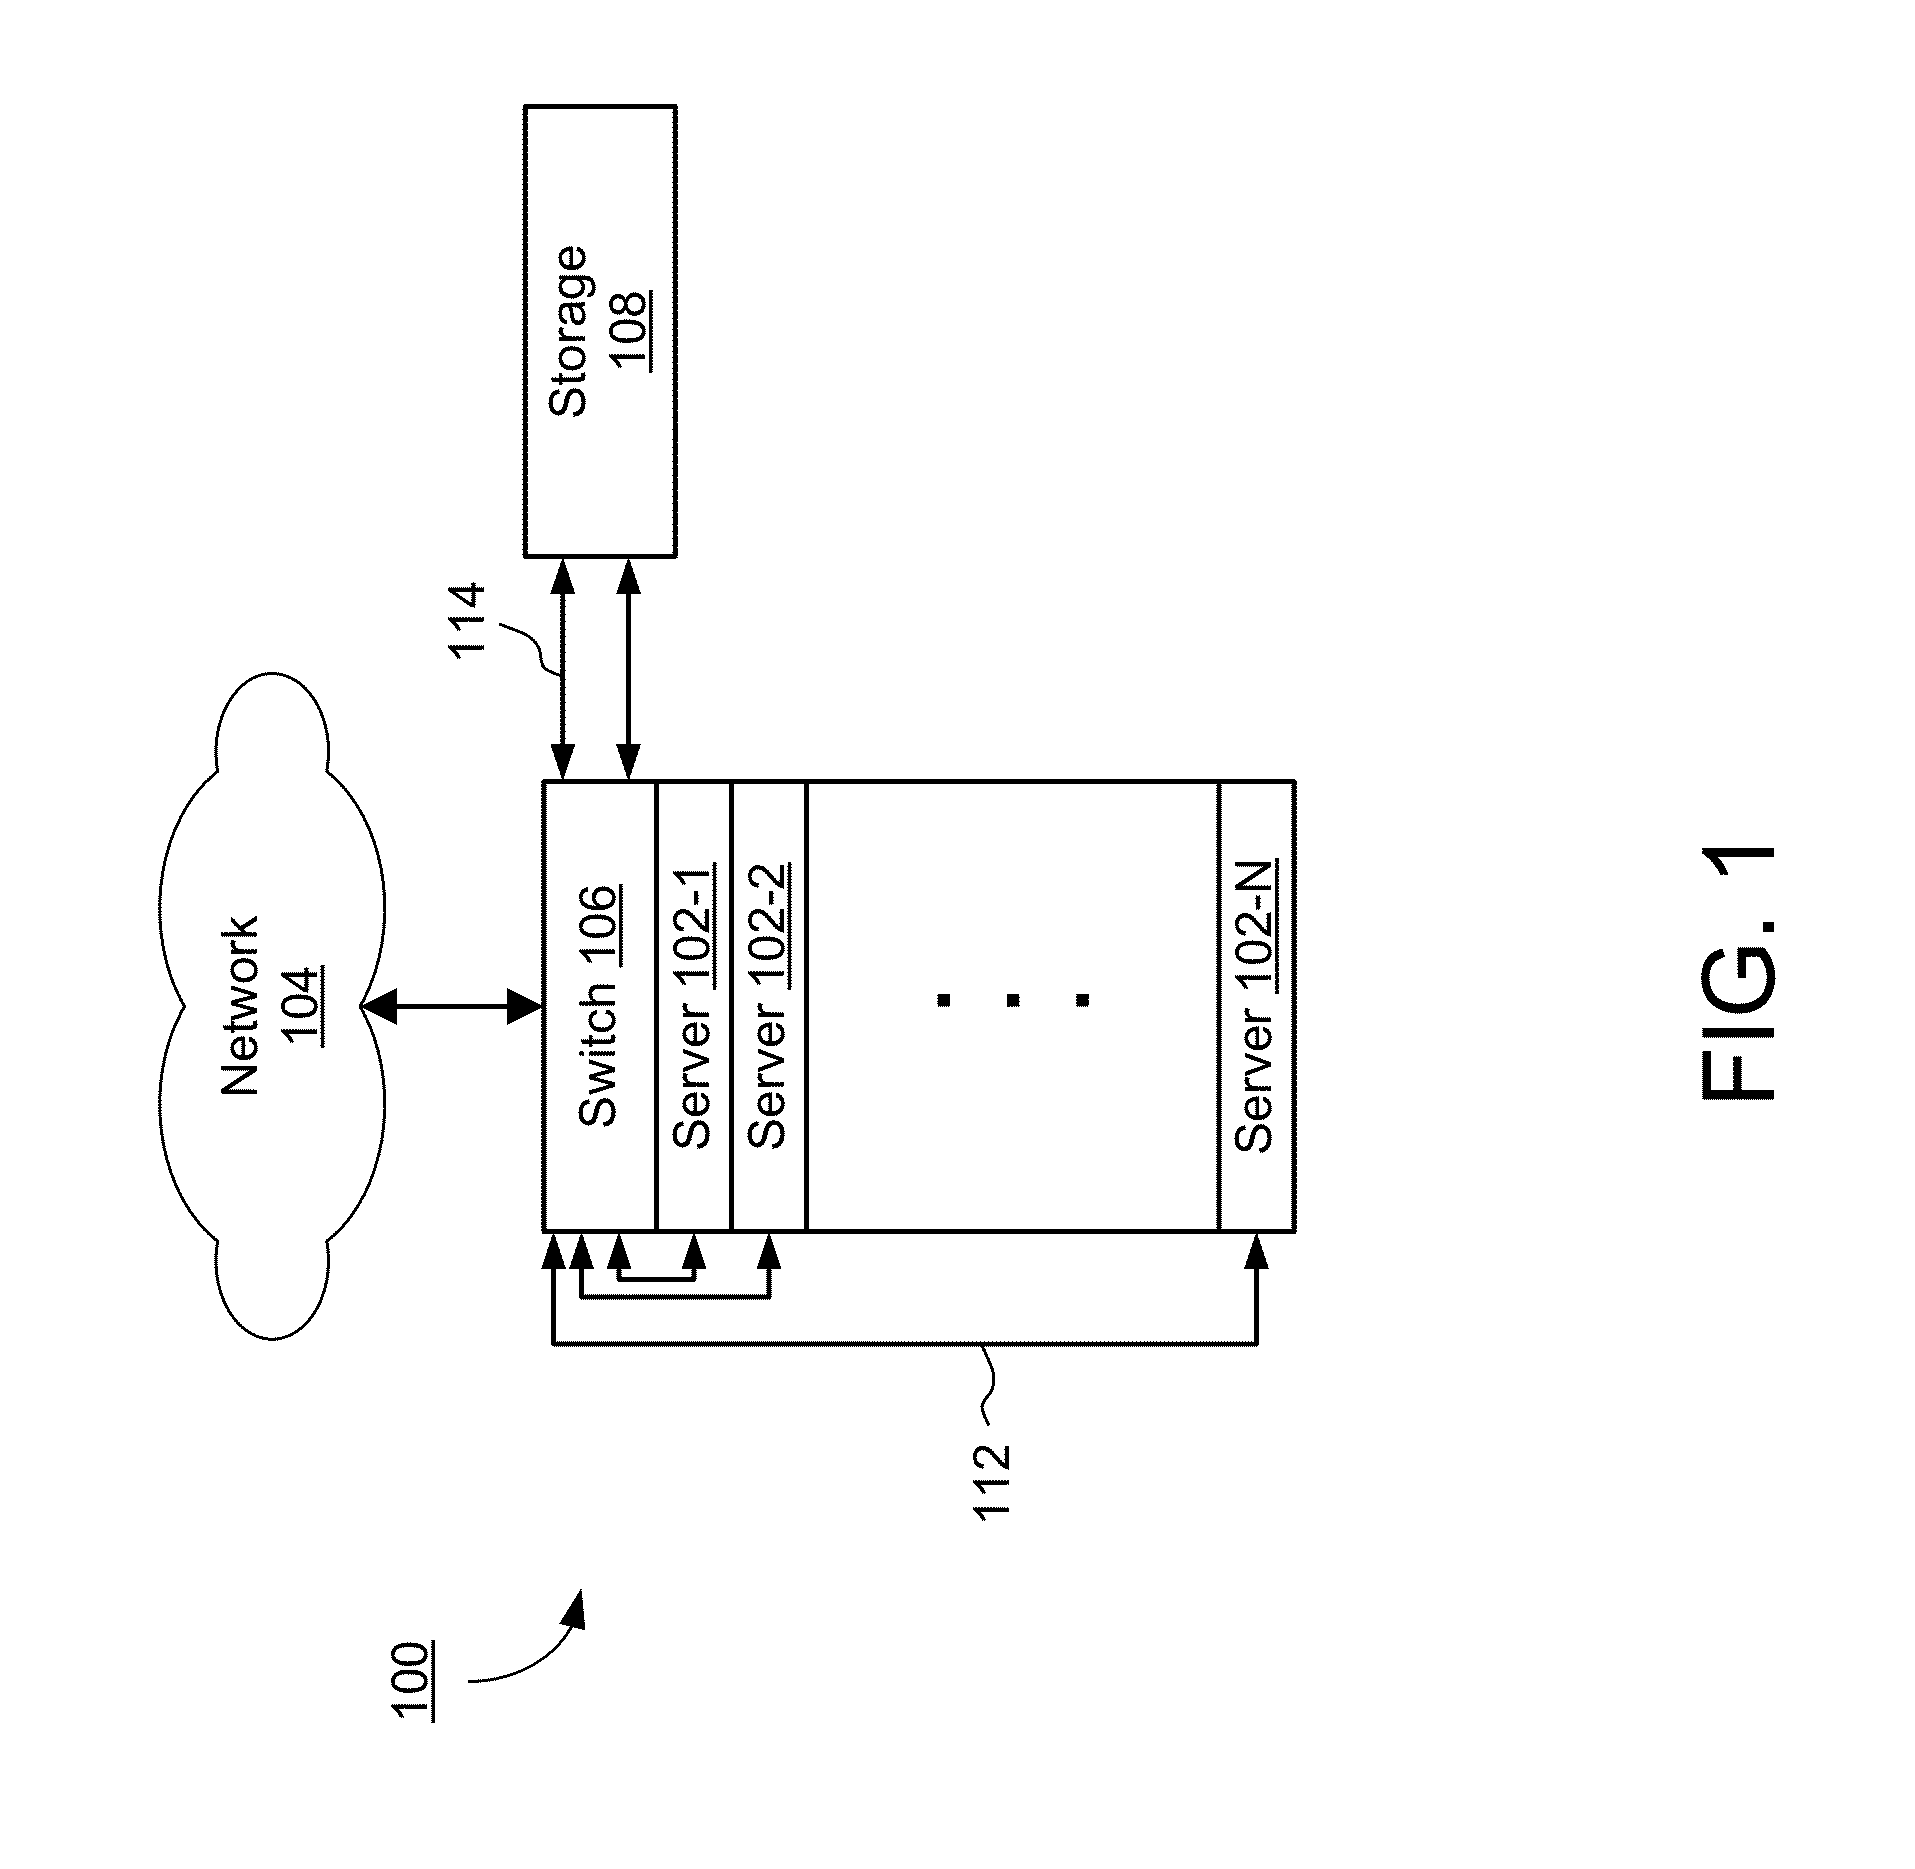 Integrated Storage and Switching for Memory Systems